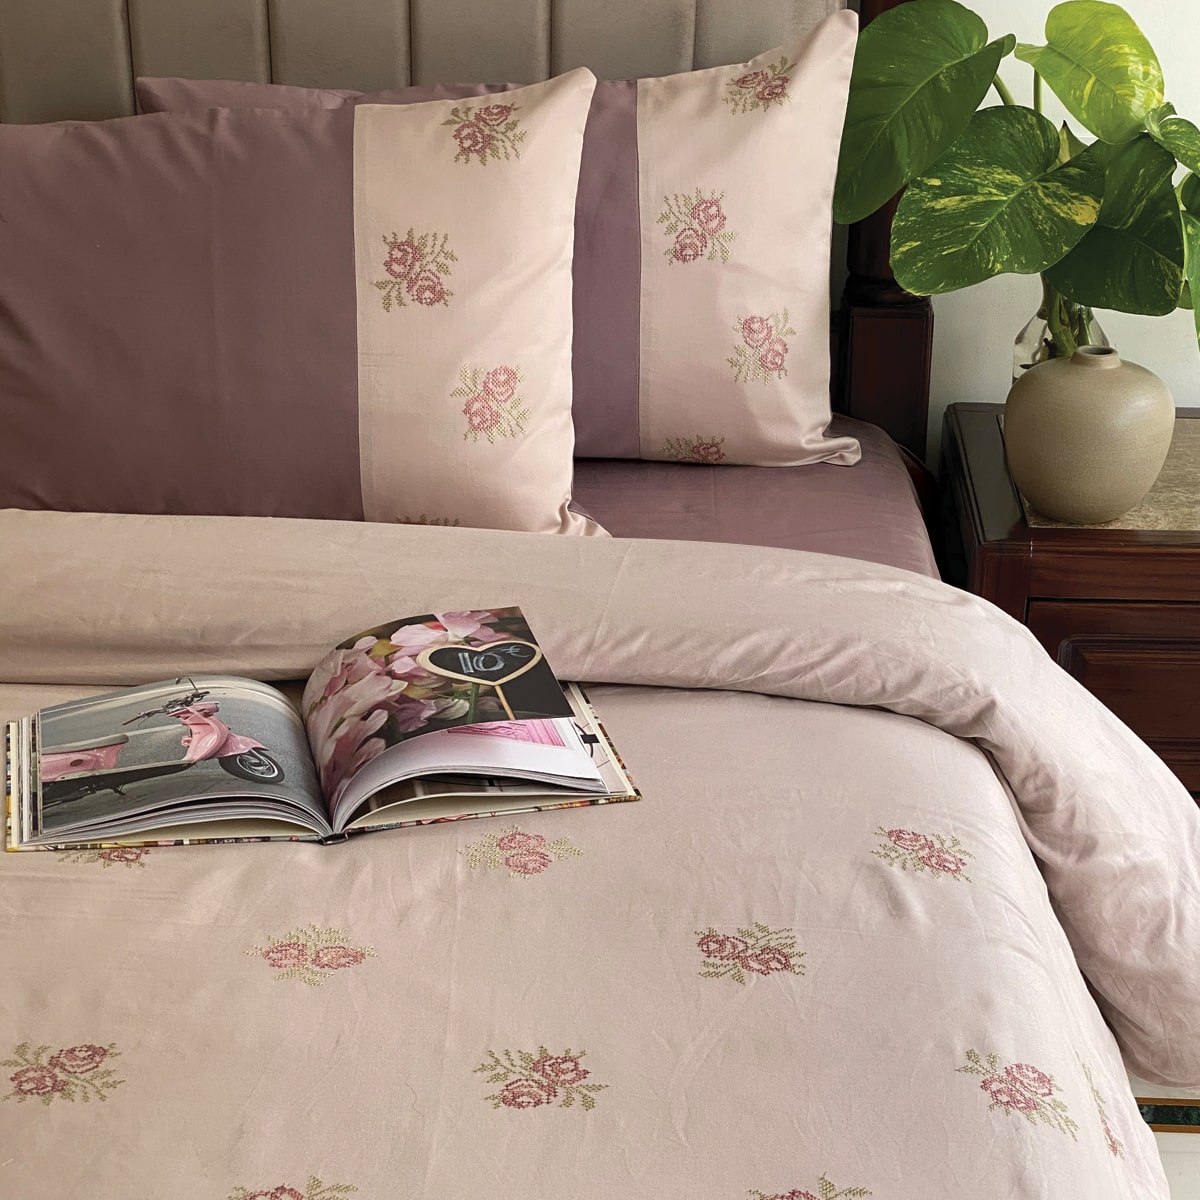 Rosella Buff and Old Rose Mesmeric Duvet Cover